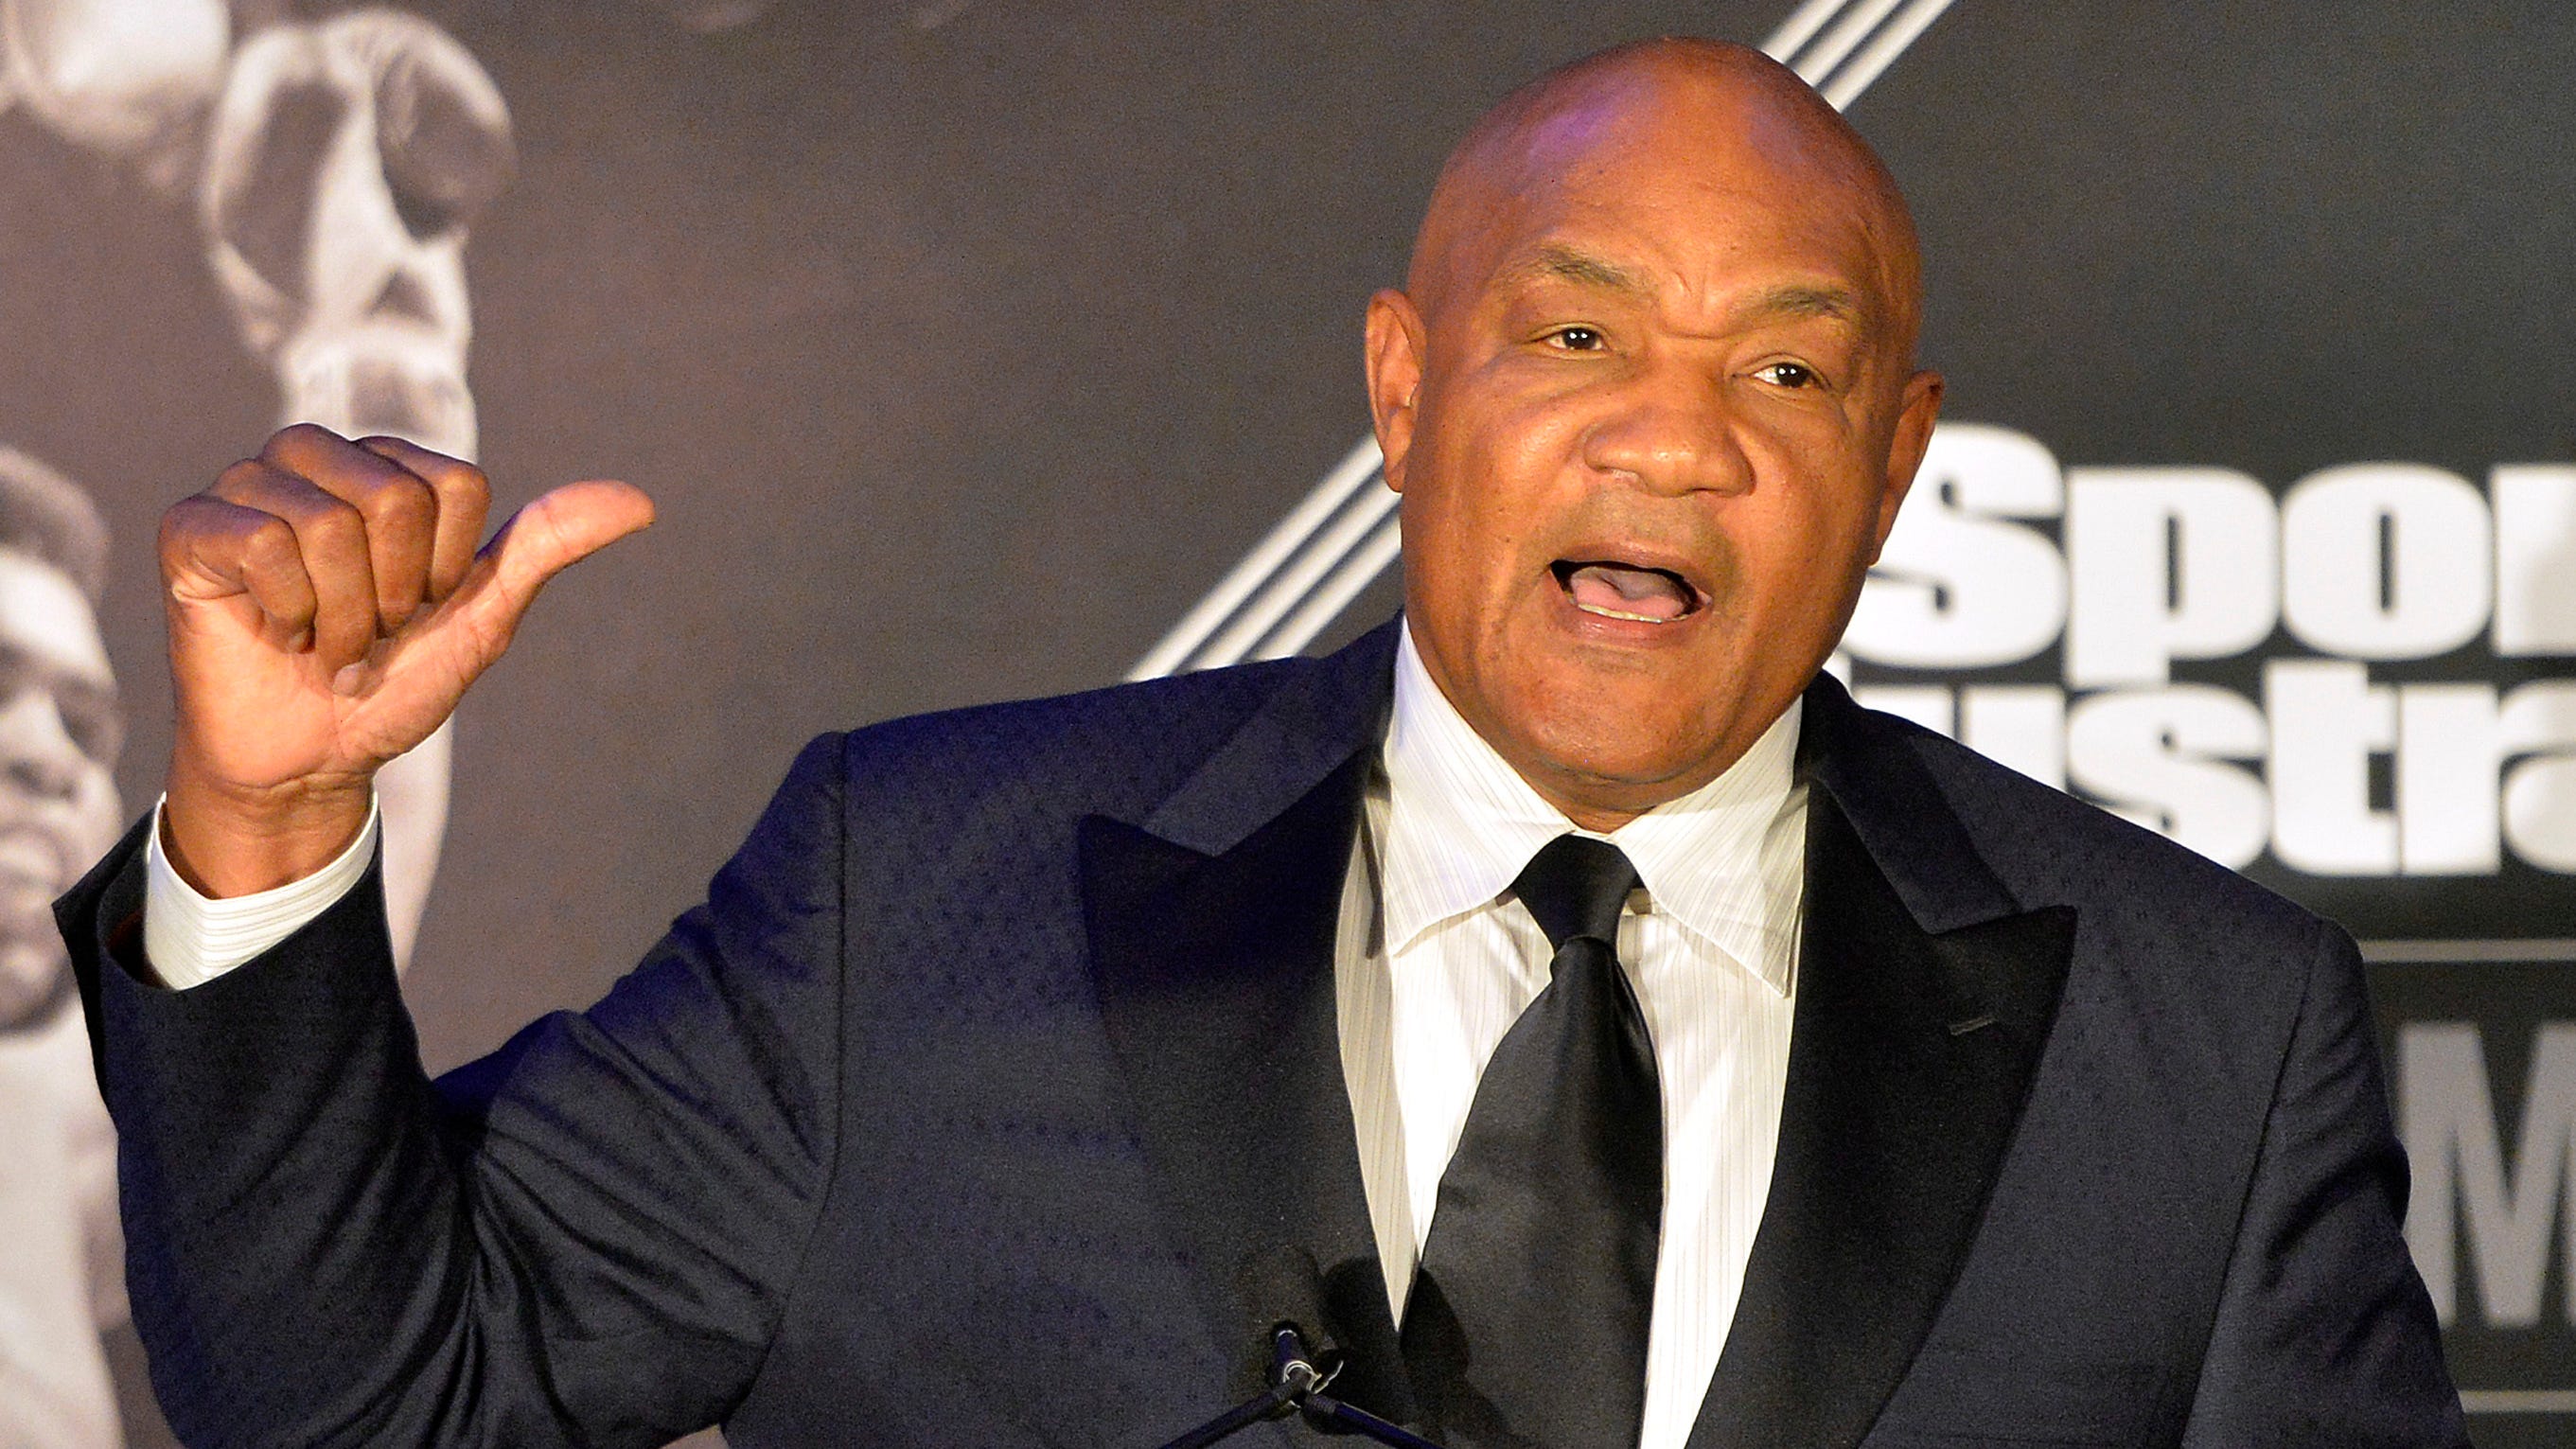 lawsuits-accuse-george-foreman-of-sexually-assaulting-two-minors-in-the-1970s